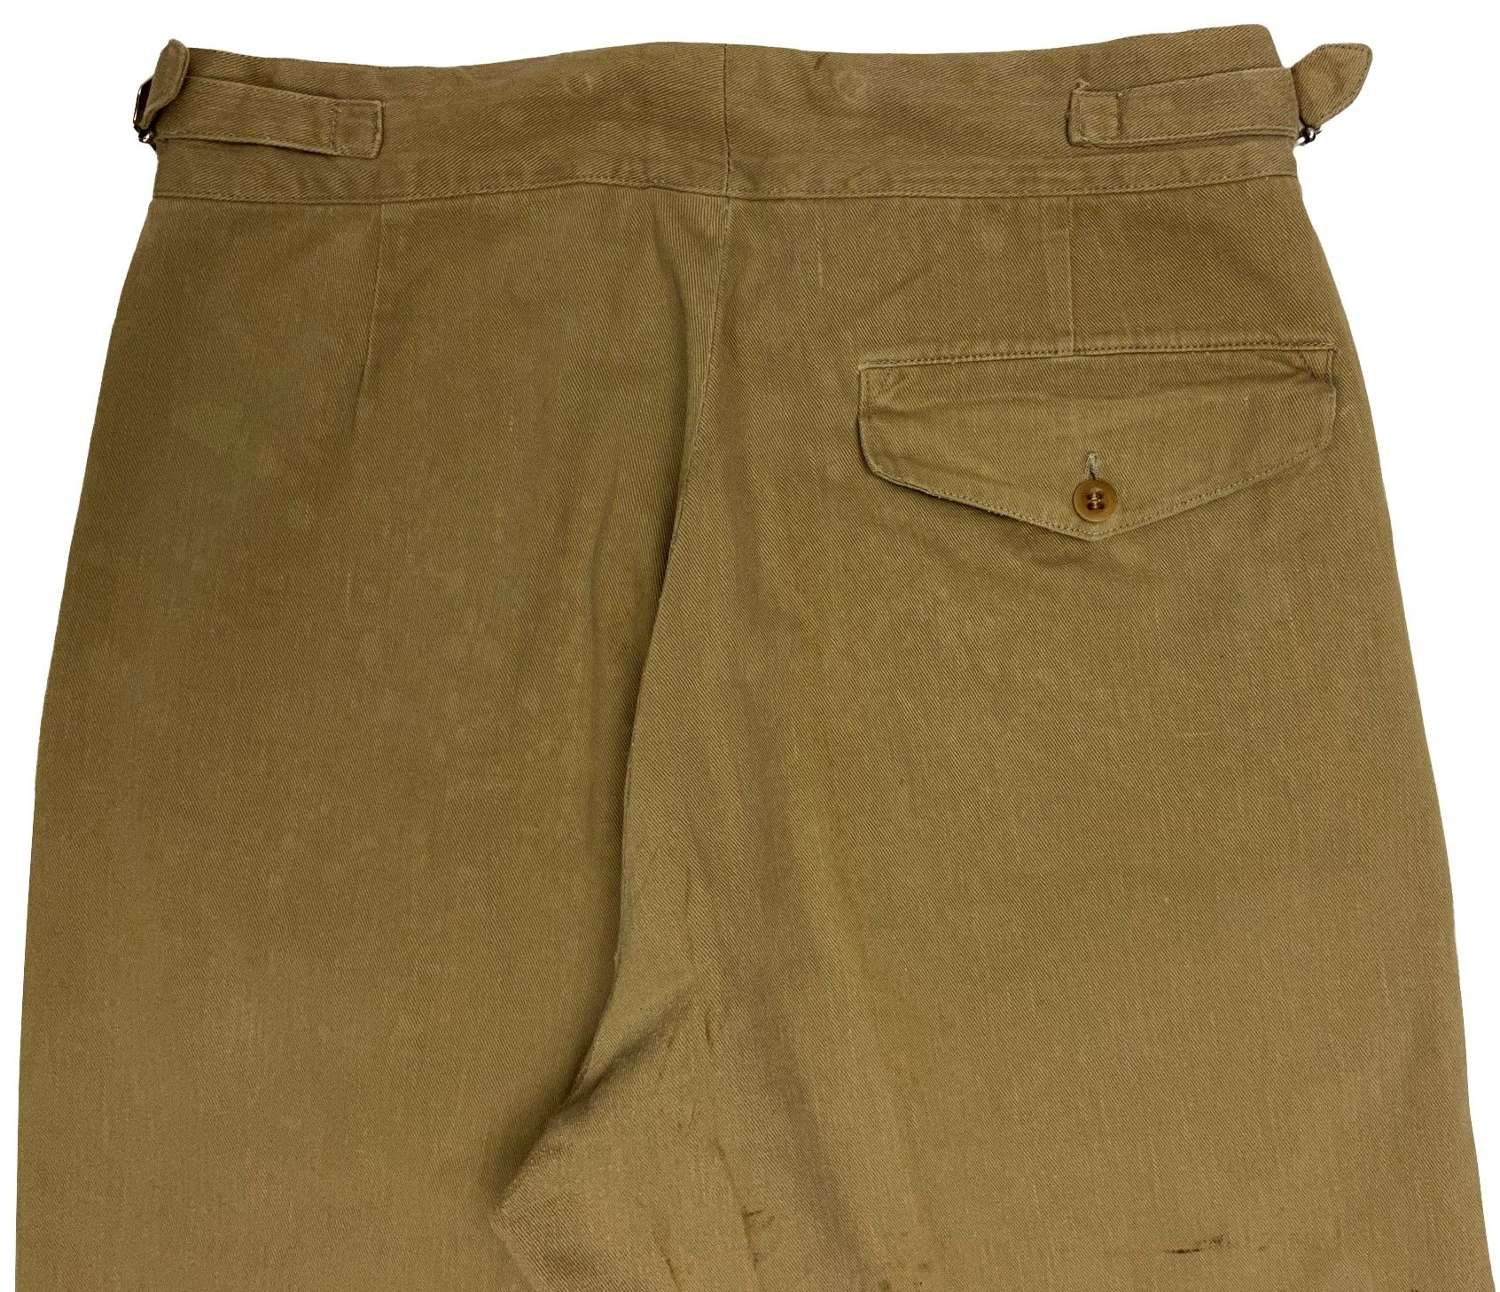 Original 1940s British Army Officers Khaki Drill Trousers by 'Alkit'